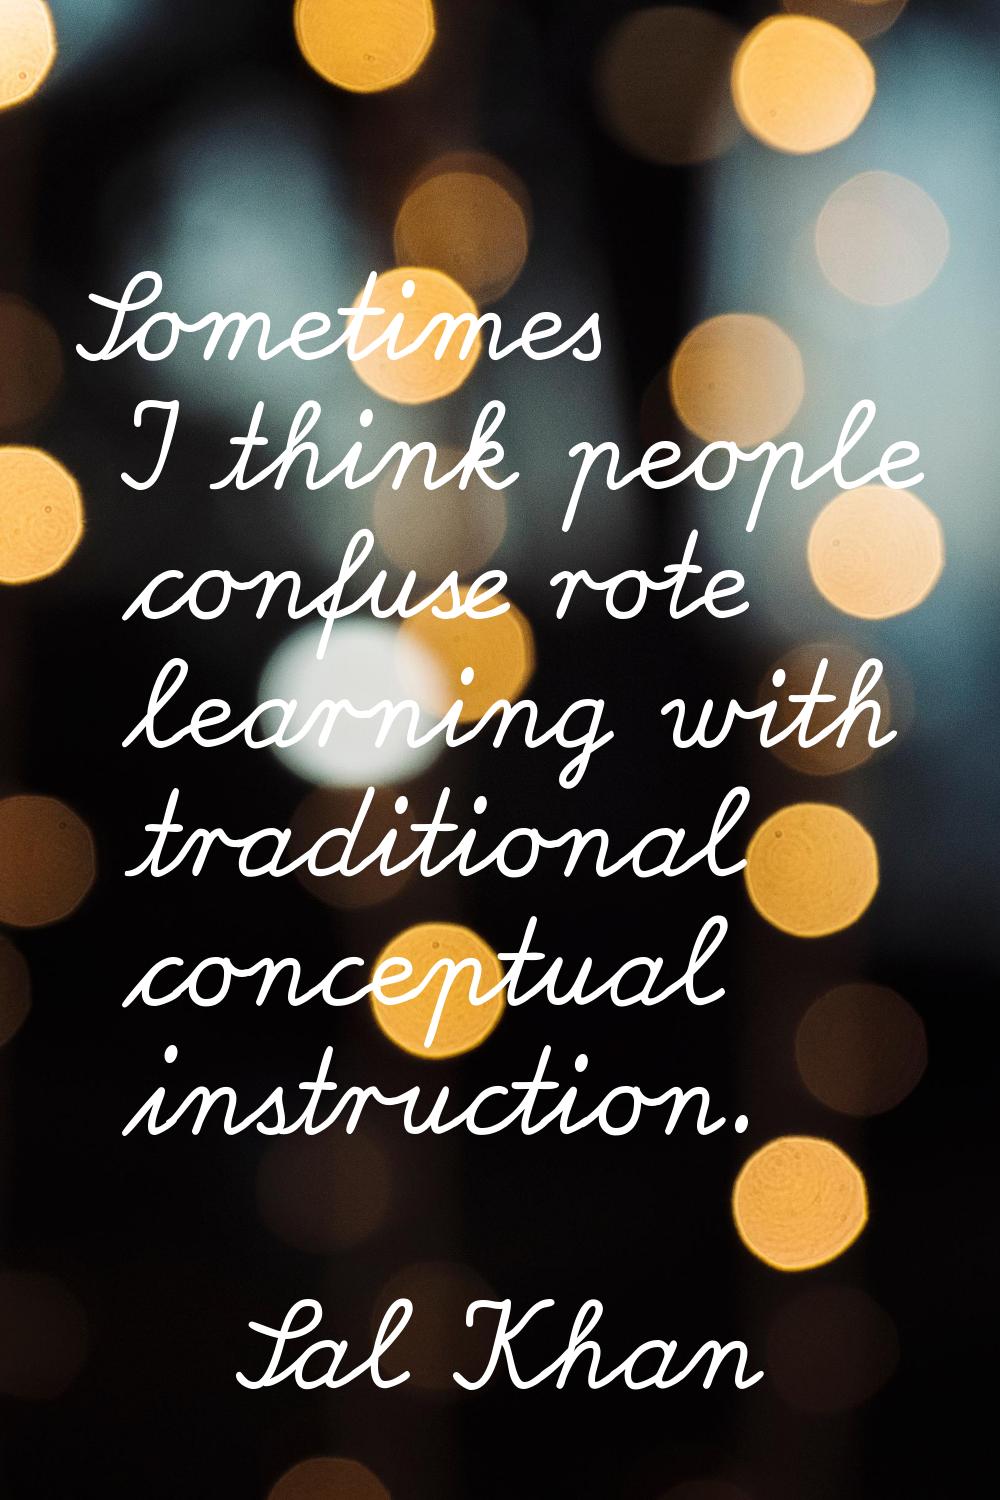 Sometimes I think people confuse rote learning with traditional conceptual instruction.